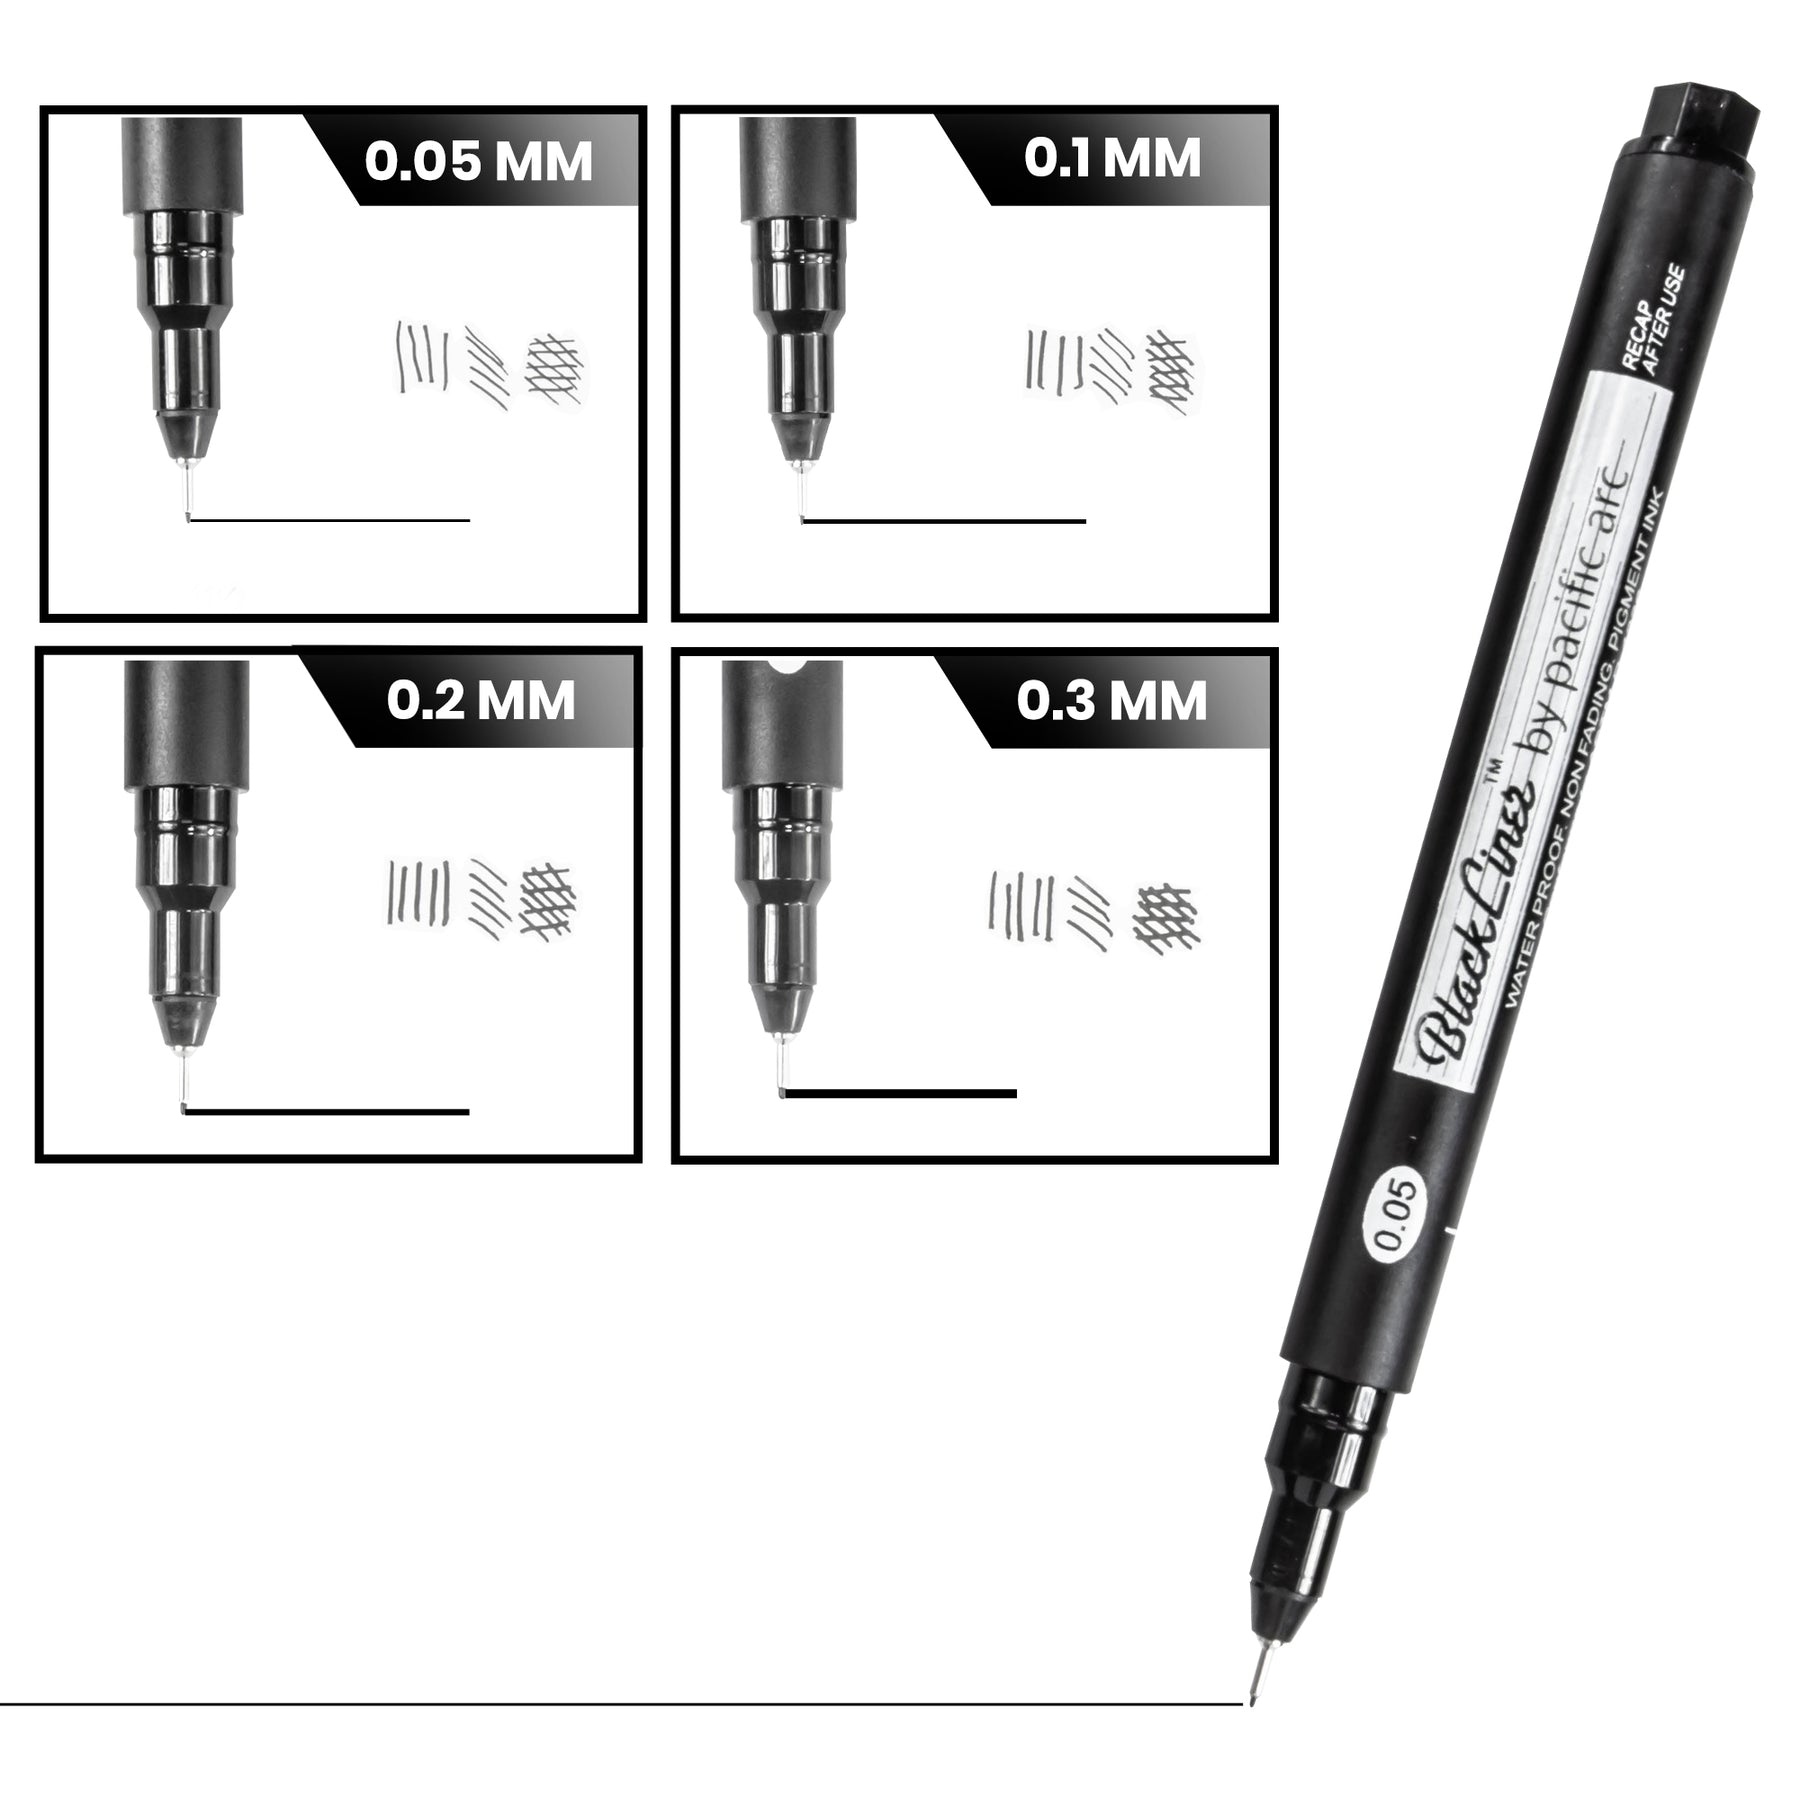 Pacific Arc, Blackliner Black Fineliner Pens, Set of 4 Differently Sized Fine Drawing Pens for Artists, Sketching Pens, Journaling Pens, Hand Lettering Pens, and Calligraphy Pens